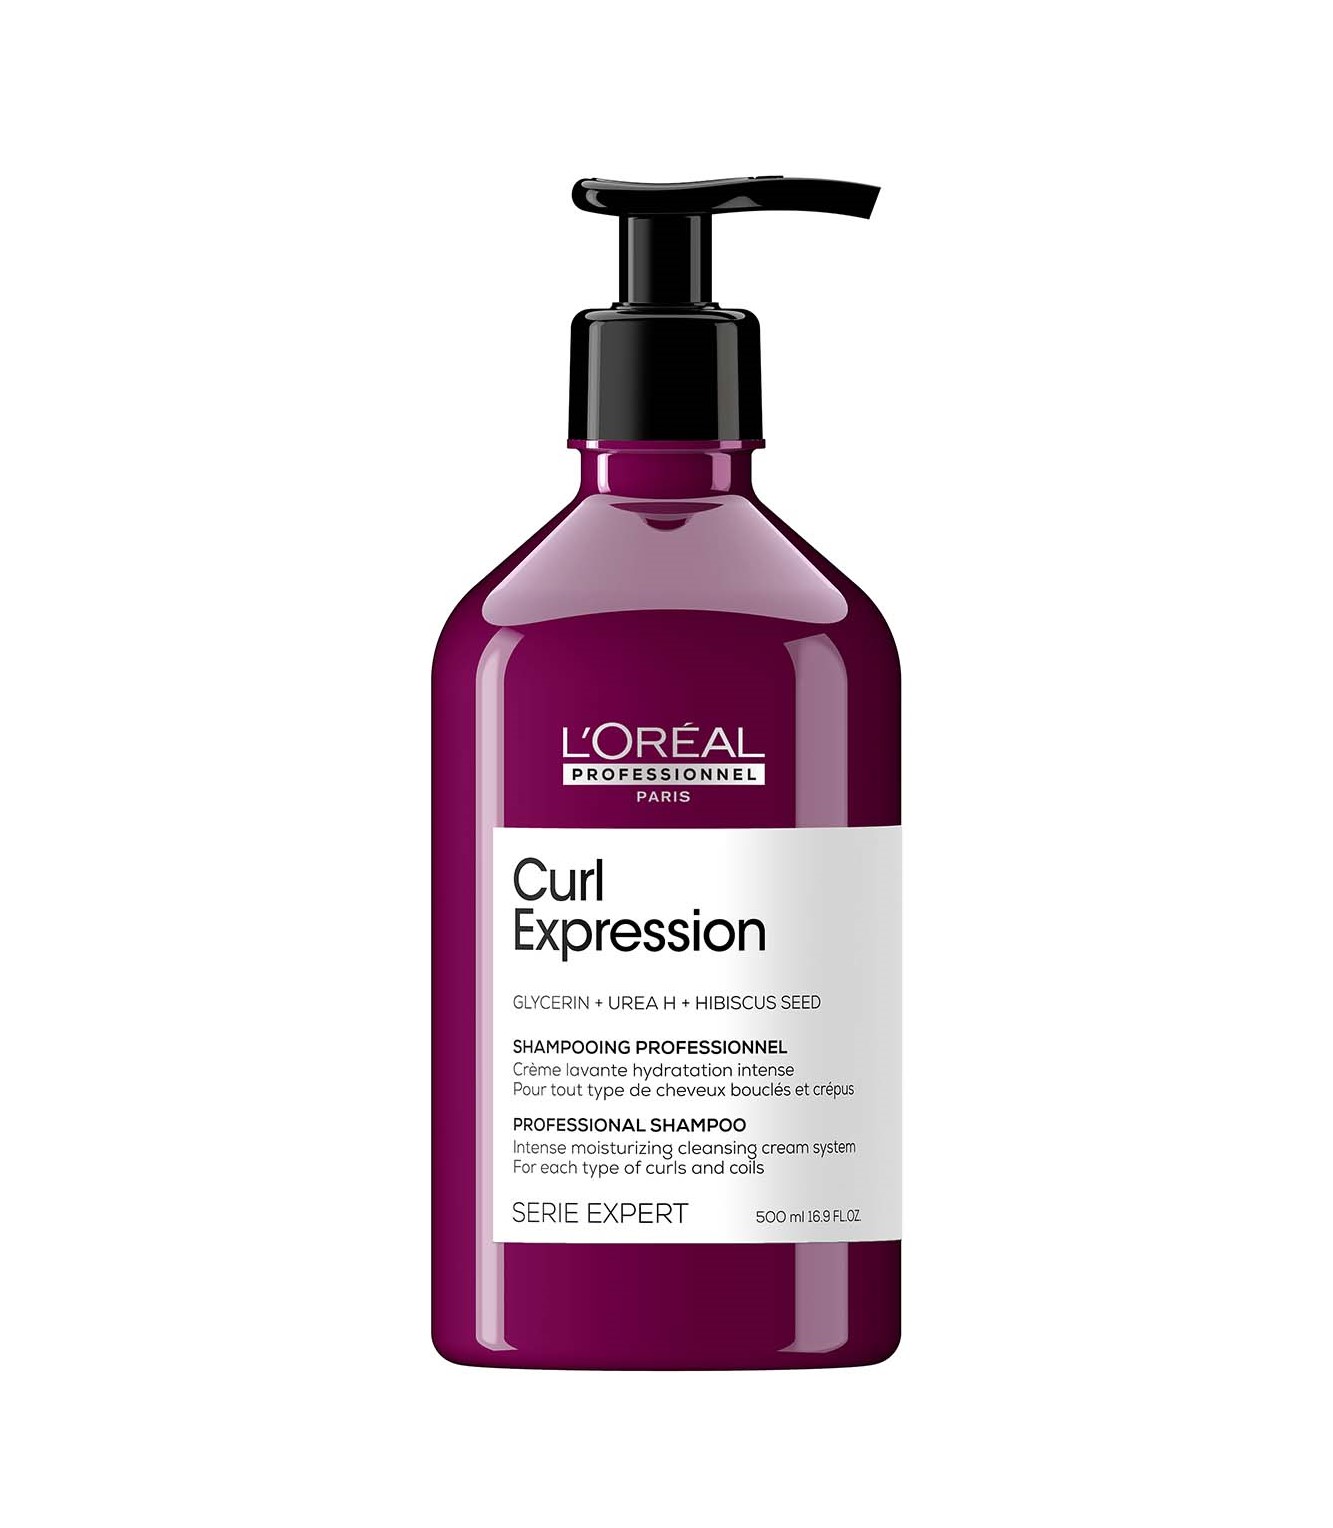 L'Oreal Professionnel Curl Expression Intense Moisturizing Cleansing Cream 500ml